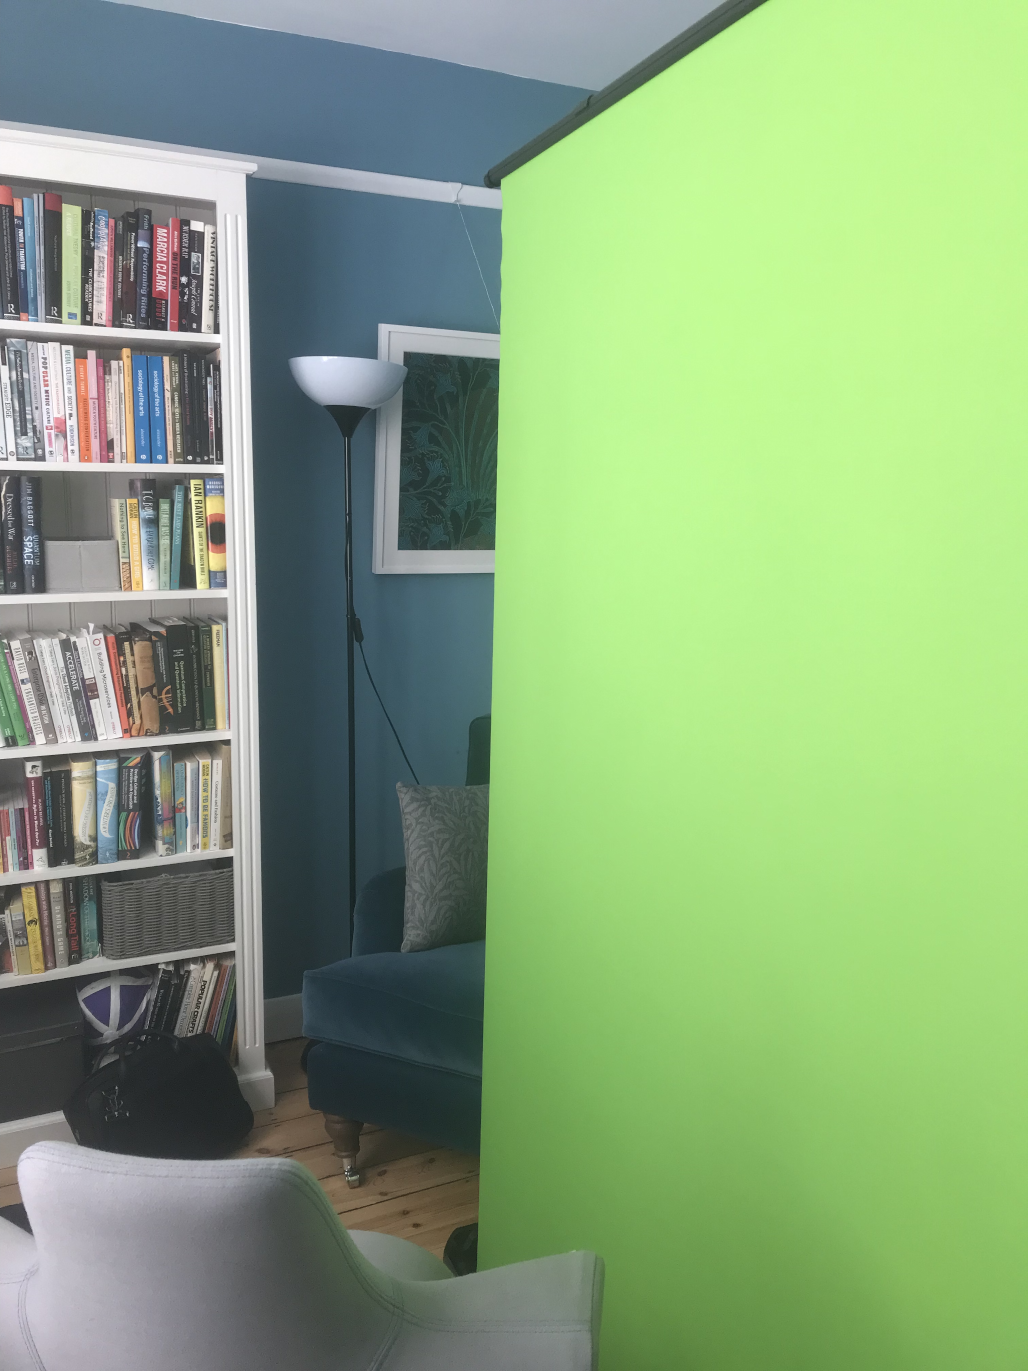 A green screen taking up half my room